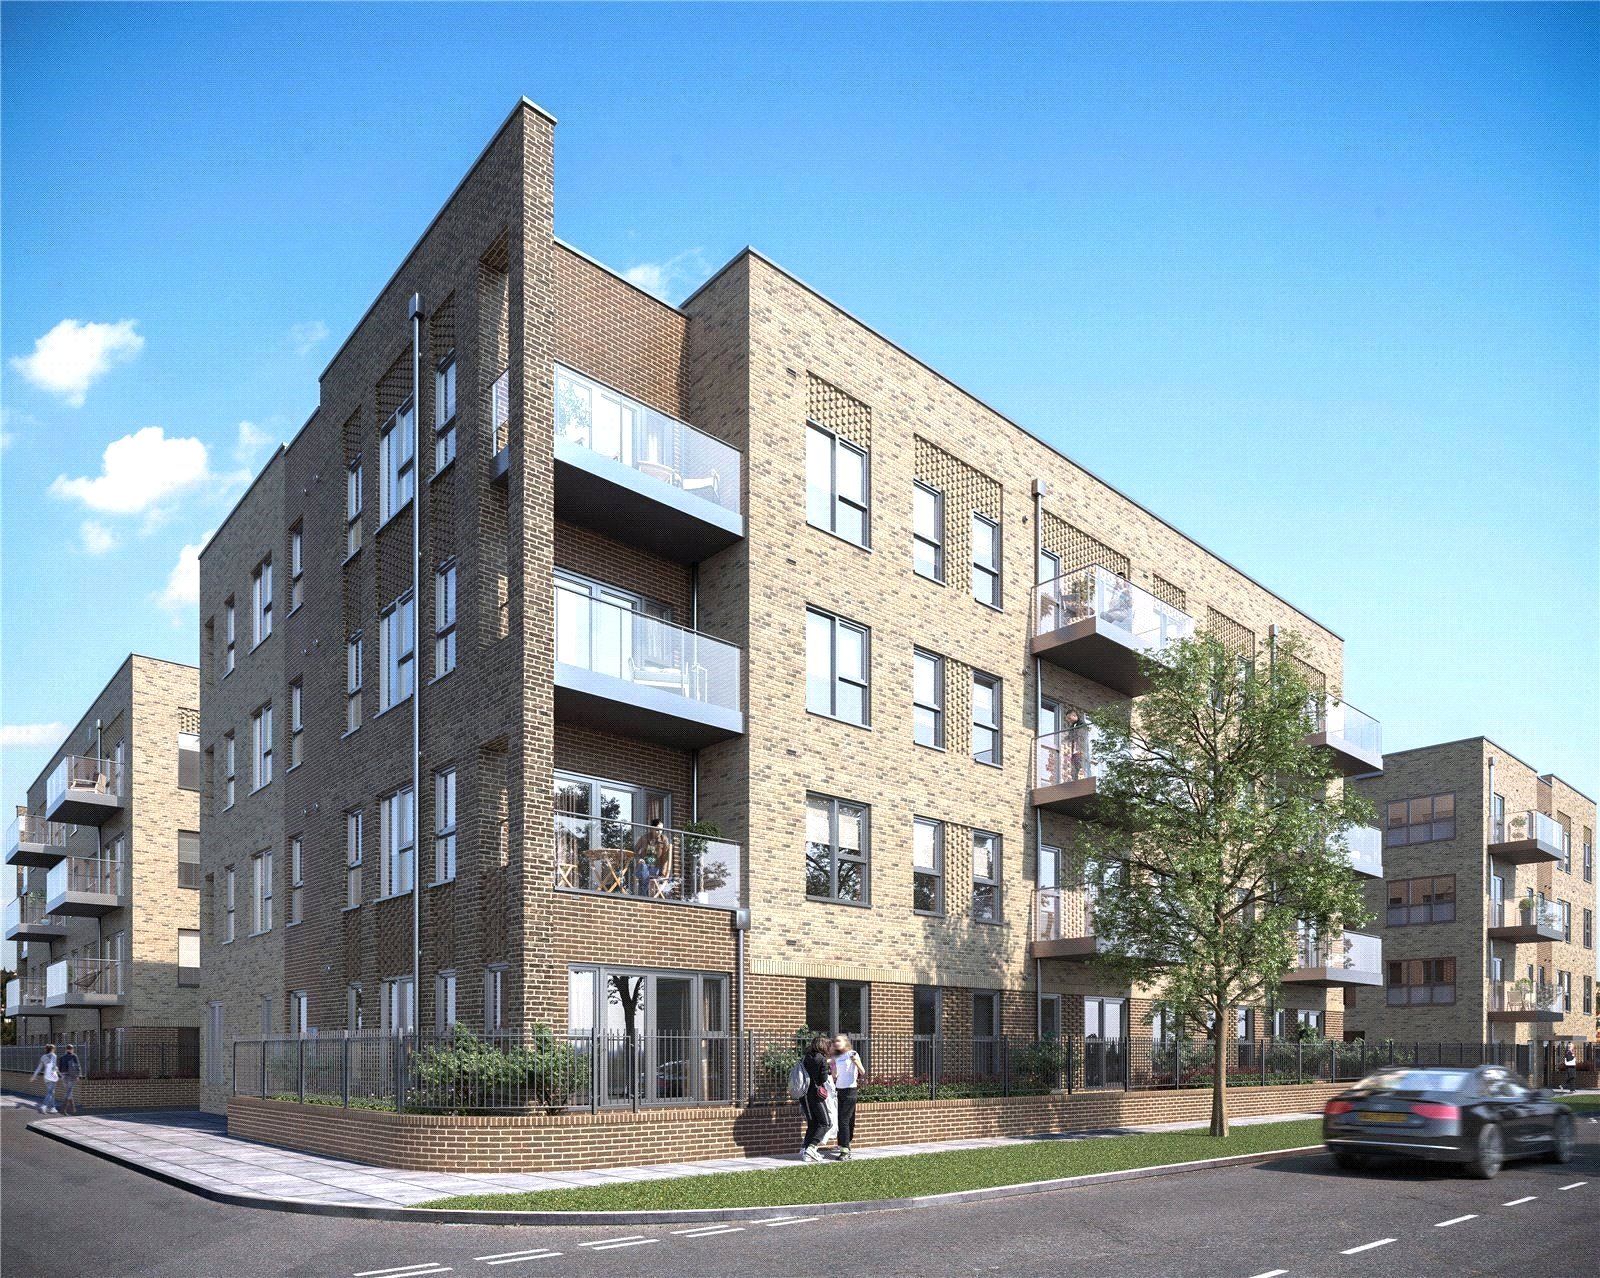 New Home, 1 Bed Flat For Sale In South Oxhey Central, Oxhey Drive, Watford Wd19 - Zoopla